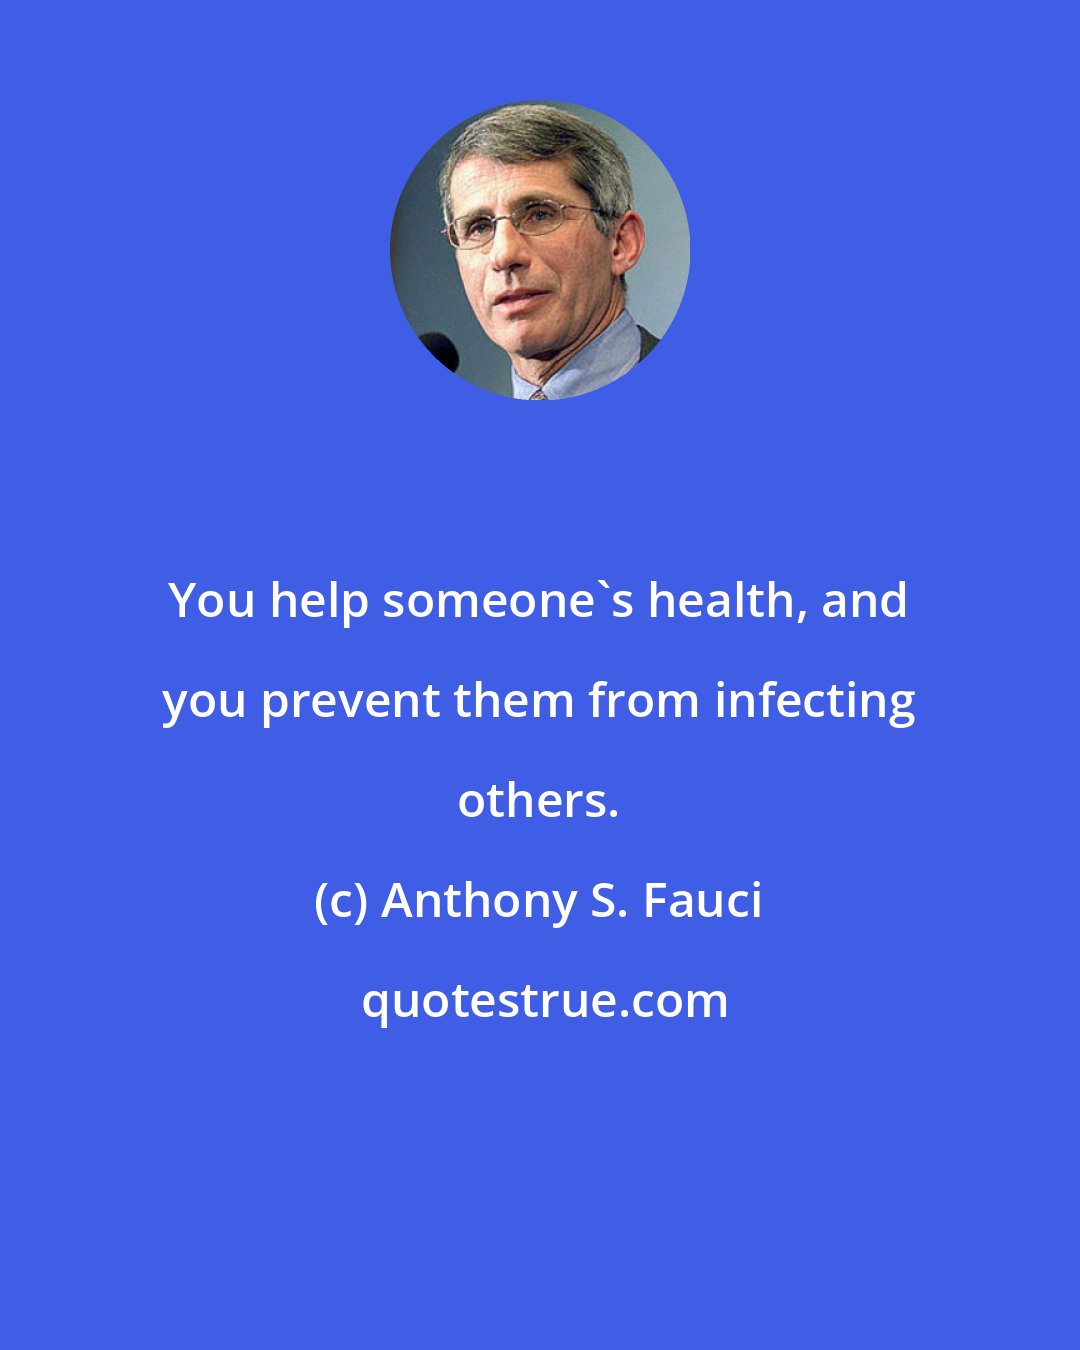 Anthony S. Fauci: You help someone's health, and you prevent them from infecting others.